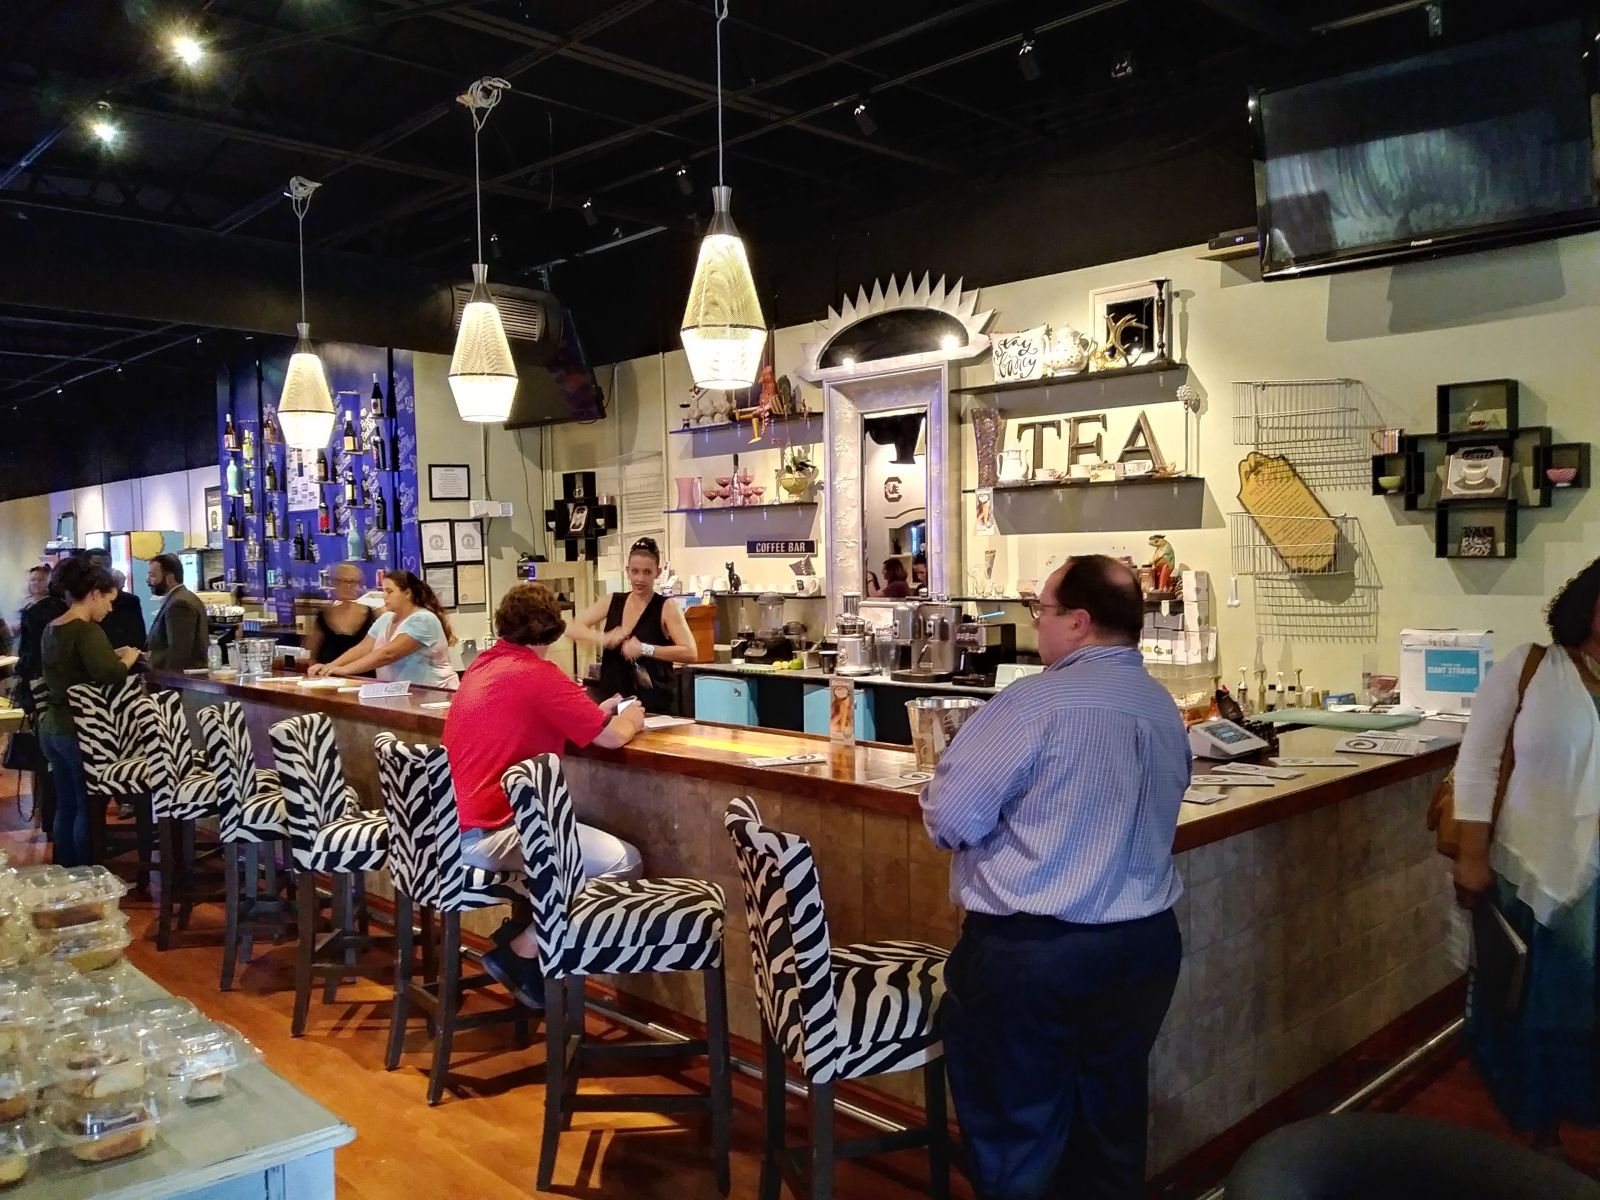 The Local Yocal, a downtown bodega, opened Thursday after years of planning. (Photo/Travis Boland)